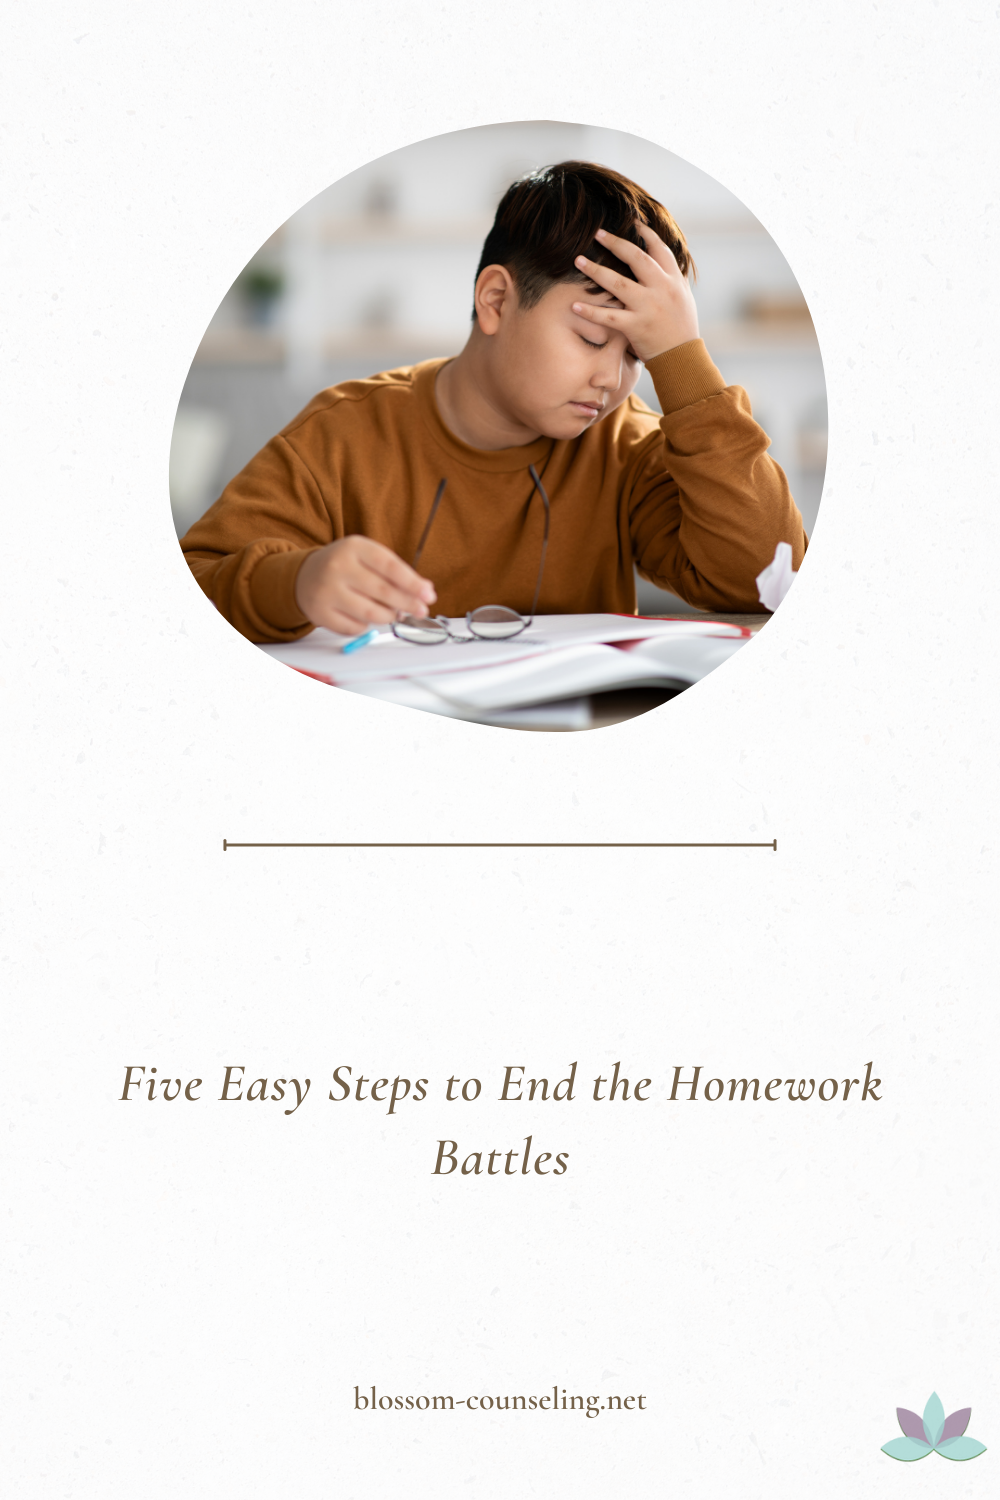 Five Easy Steps to End the Homework Battles